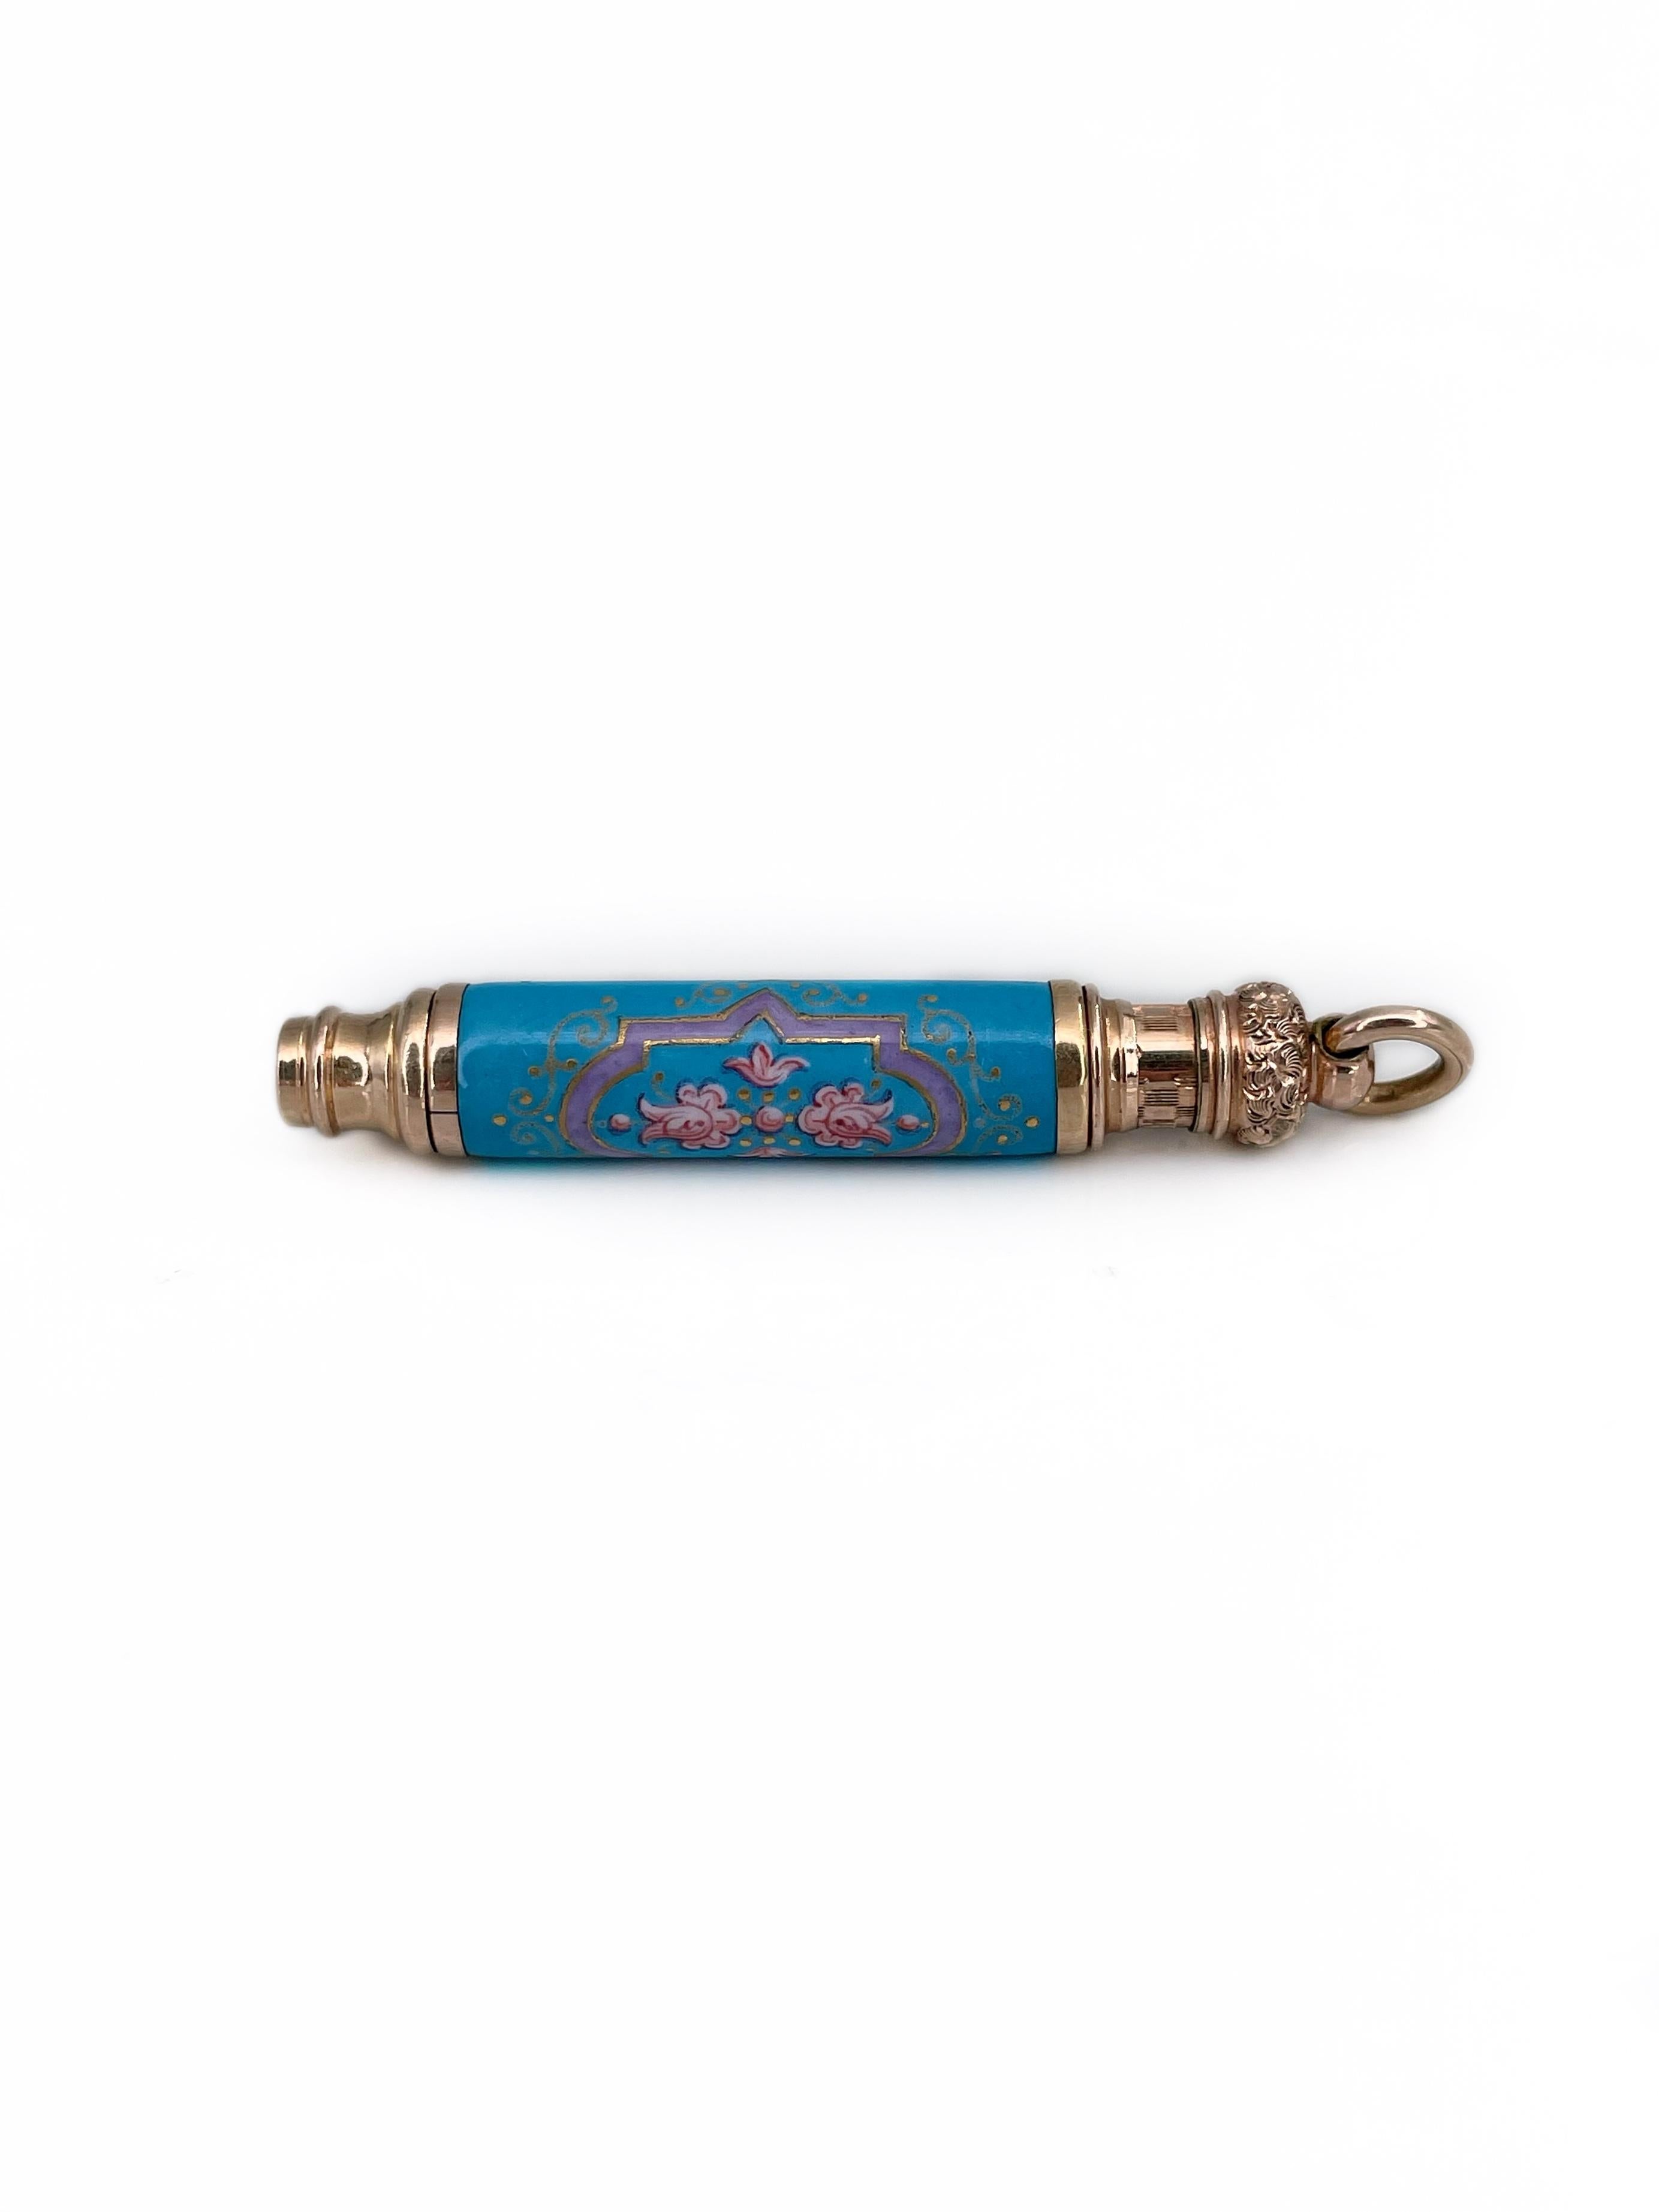 This is an elegant antique telescopic propelling pencil pendant designed by Leroy W. Fairchild. Circa 1870.

It is gold cased and adorned with colourful sky blue and pink enamel in floral motifs.

Signed: L. W. Fairchild March 21 71

Weight: